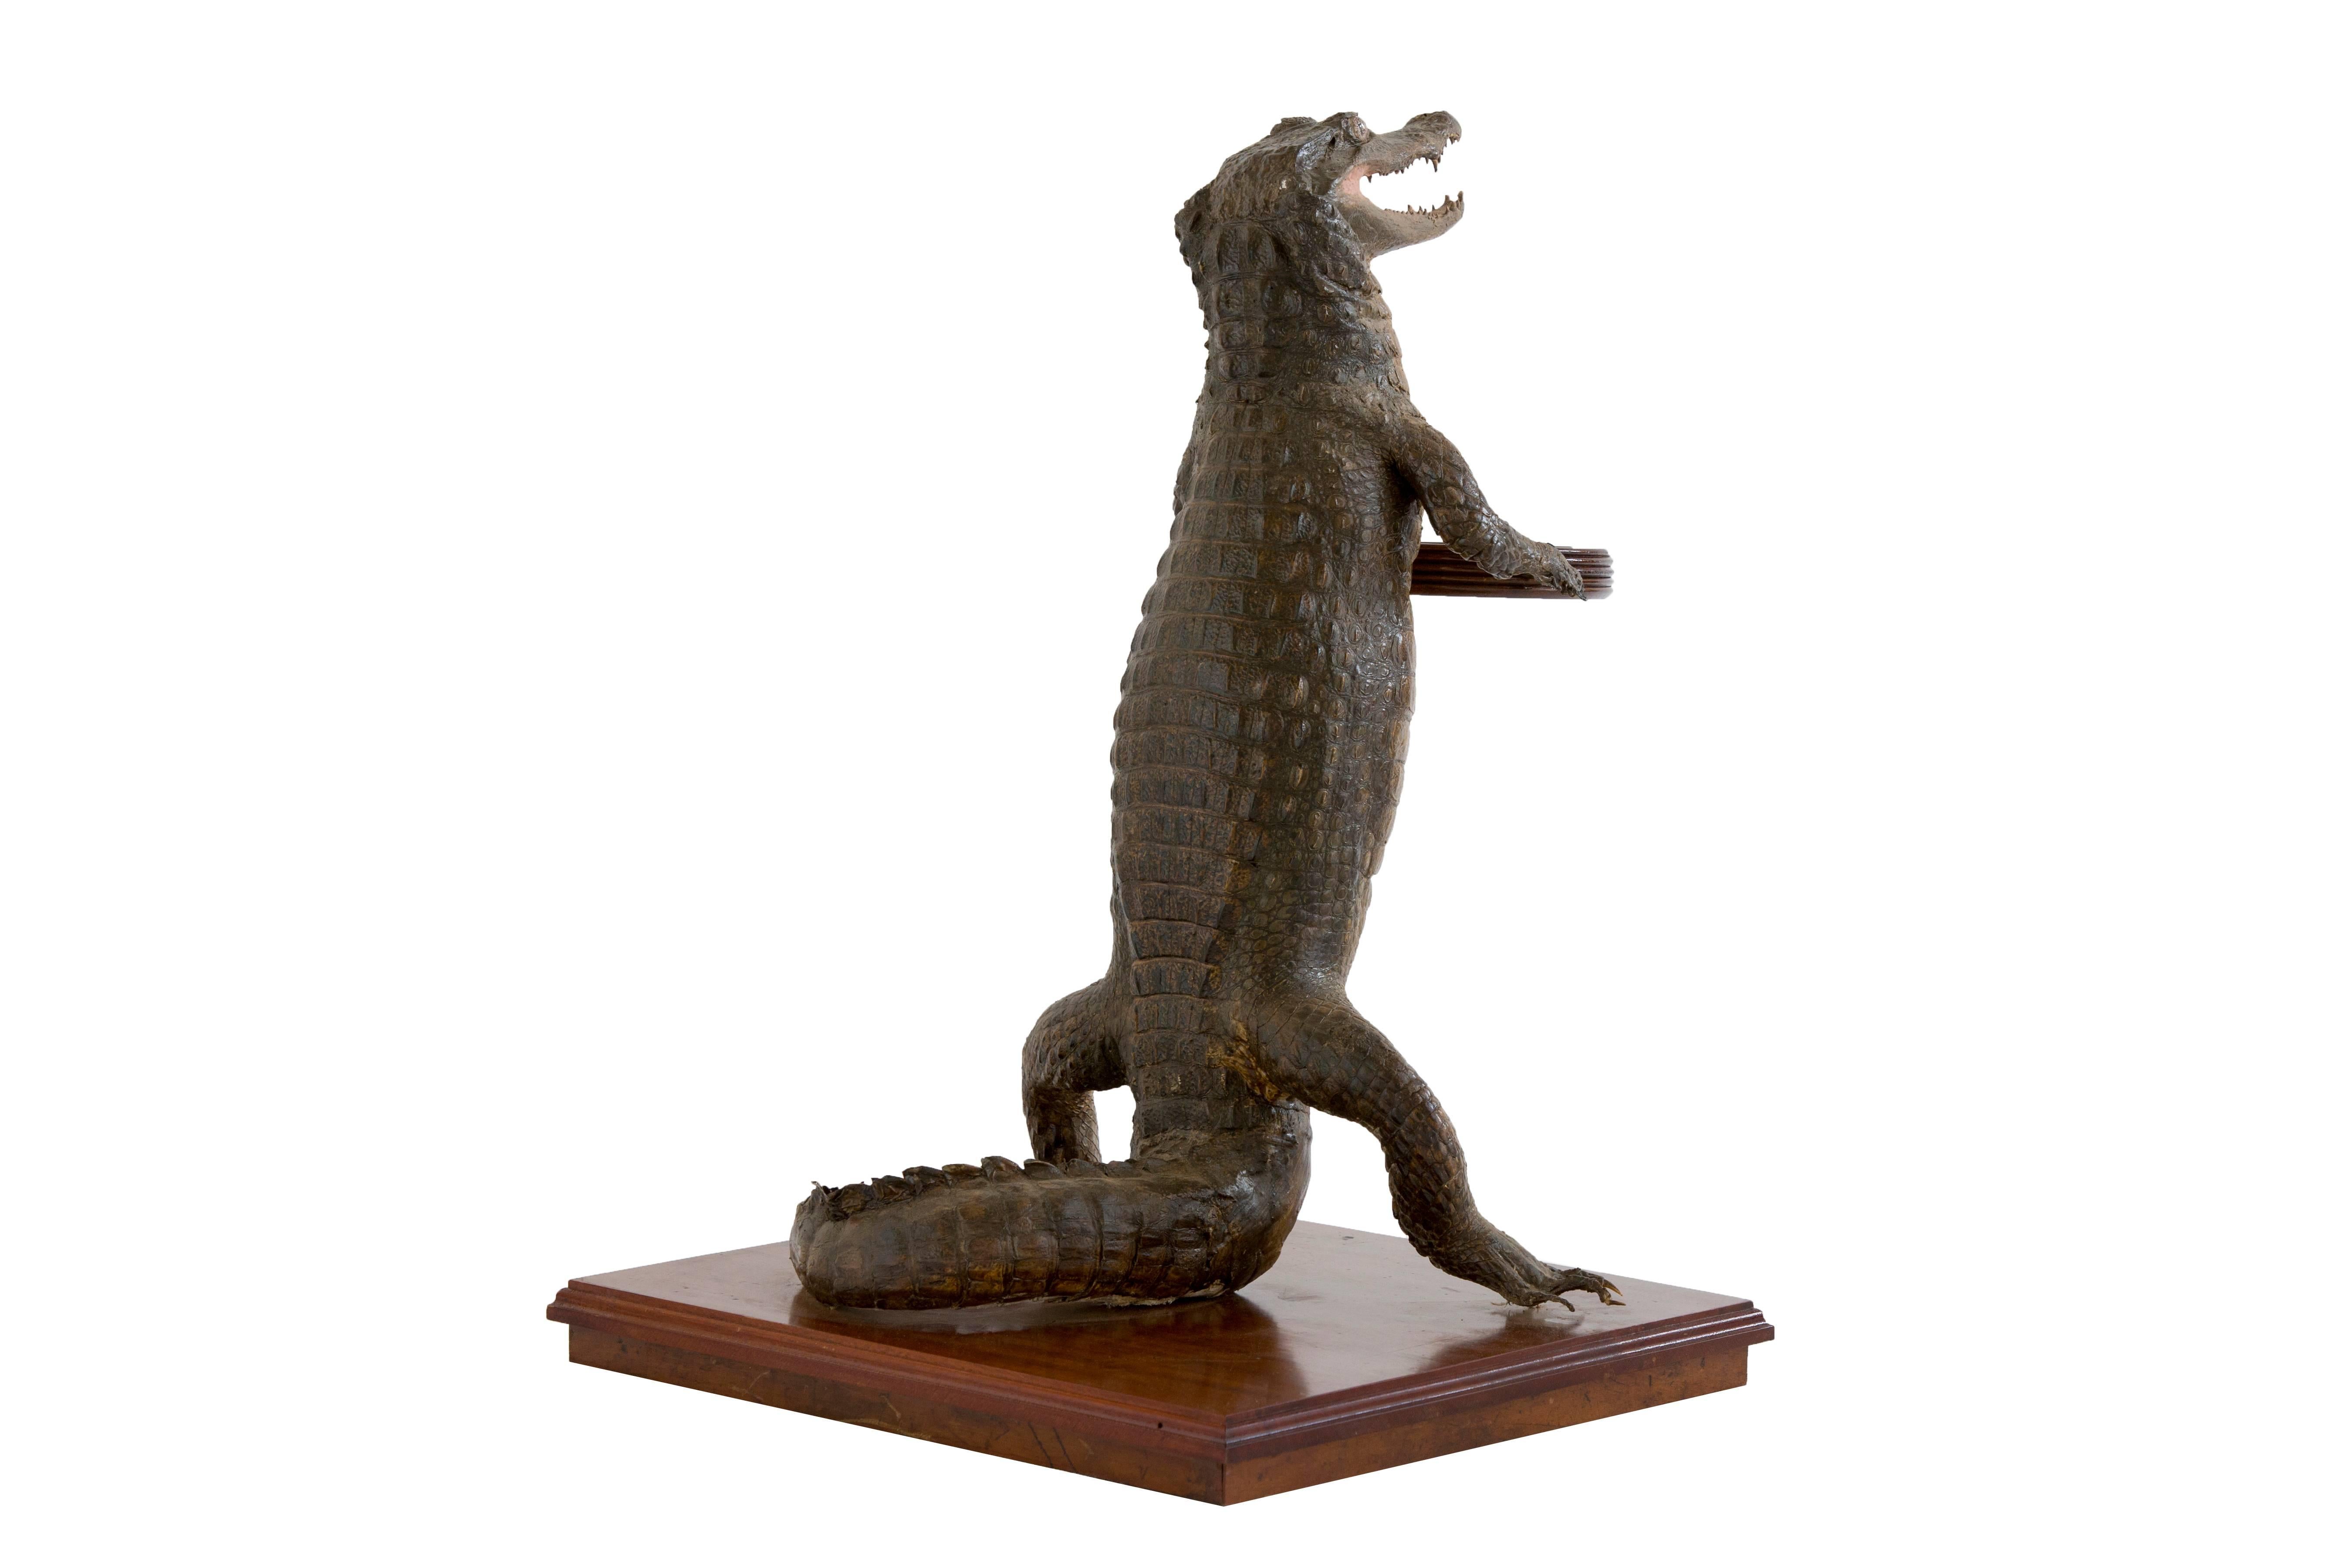 These amusing Victorian taxidermy studies of crocodiles holding card trays are rare classics of the late 19th century when there was in interest in all aspects of the natural world. They are shown in this whimsical manner as a waiter.